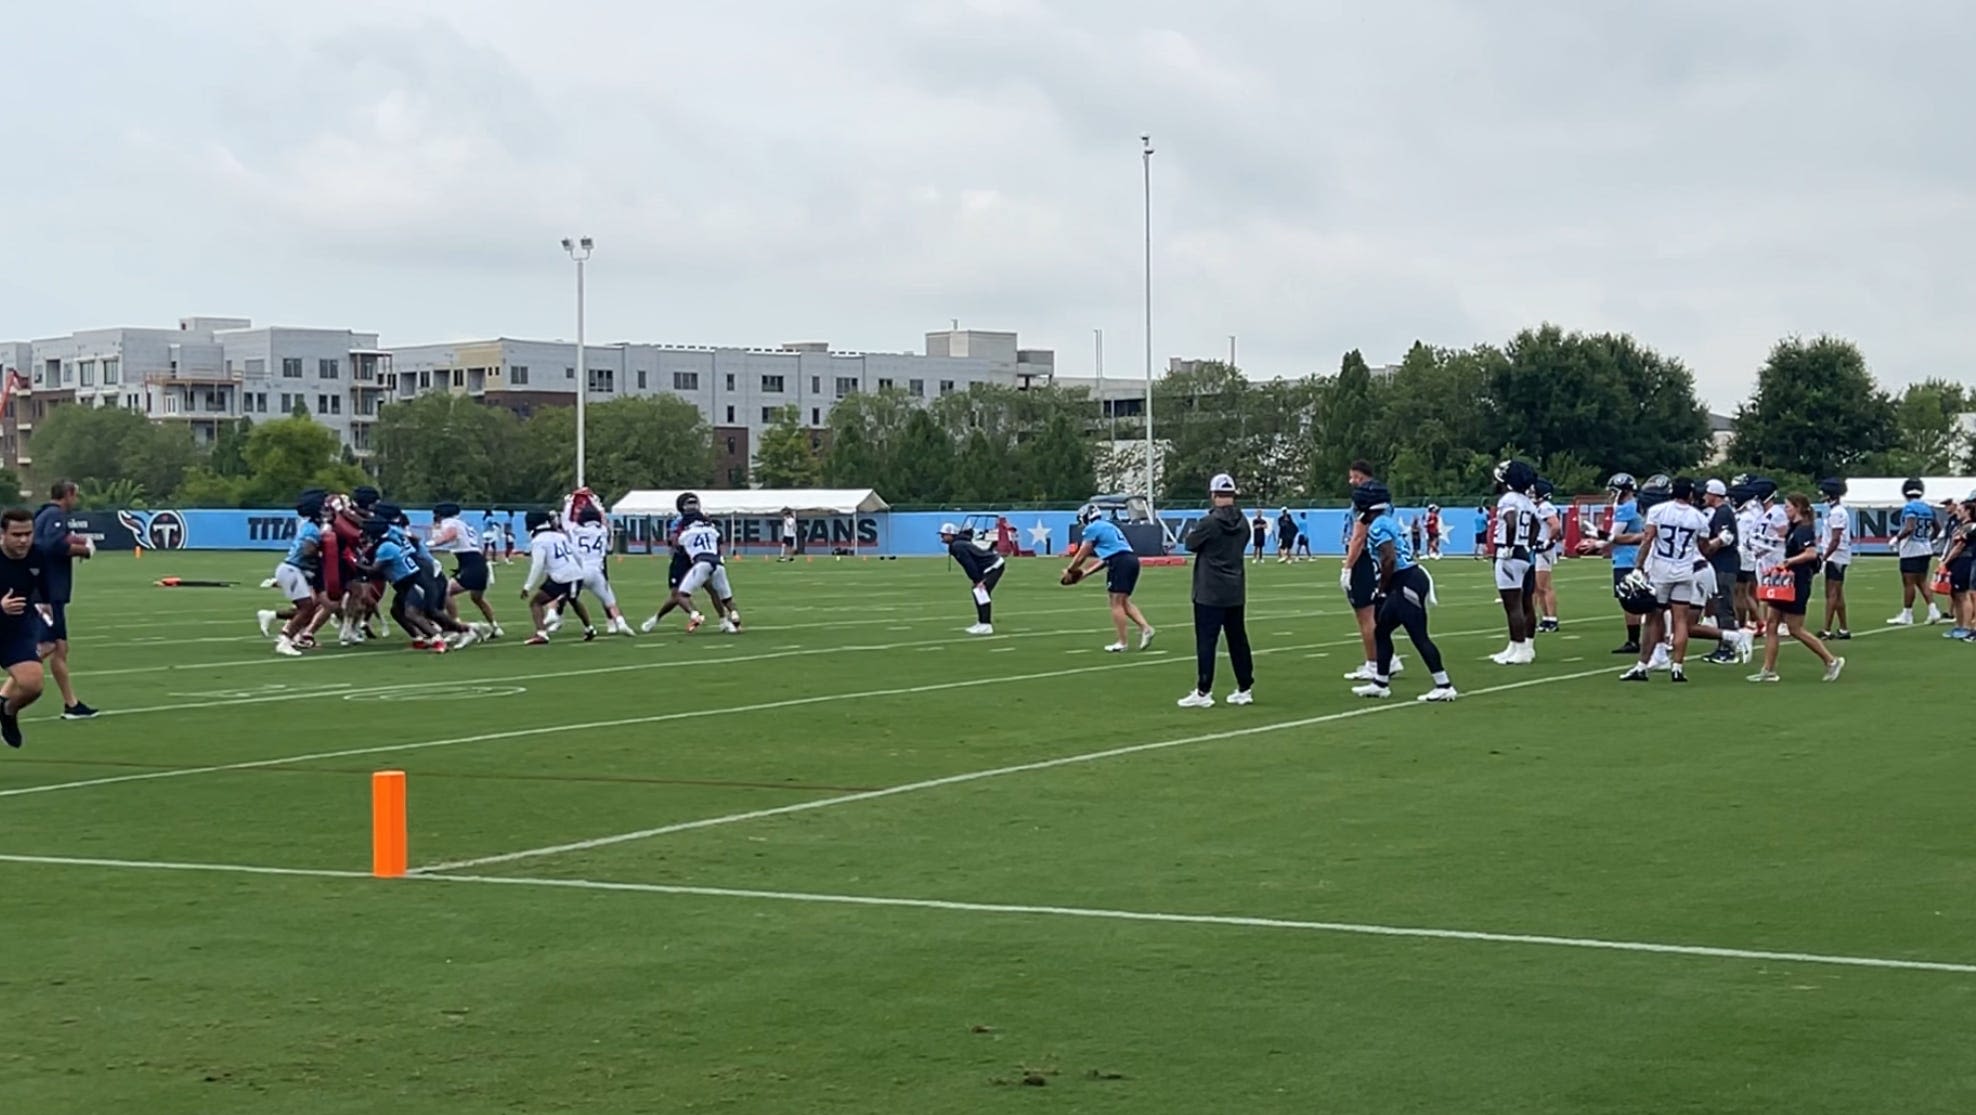 Tennessee Titans punter Ryan Stonehouse punts the ball at practice